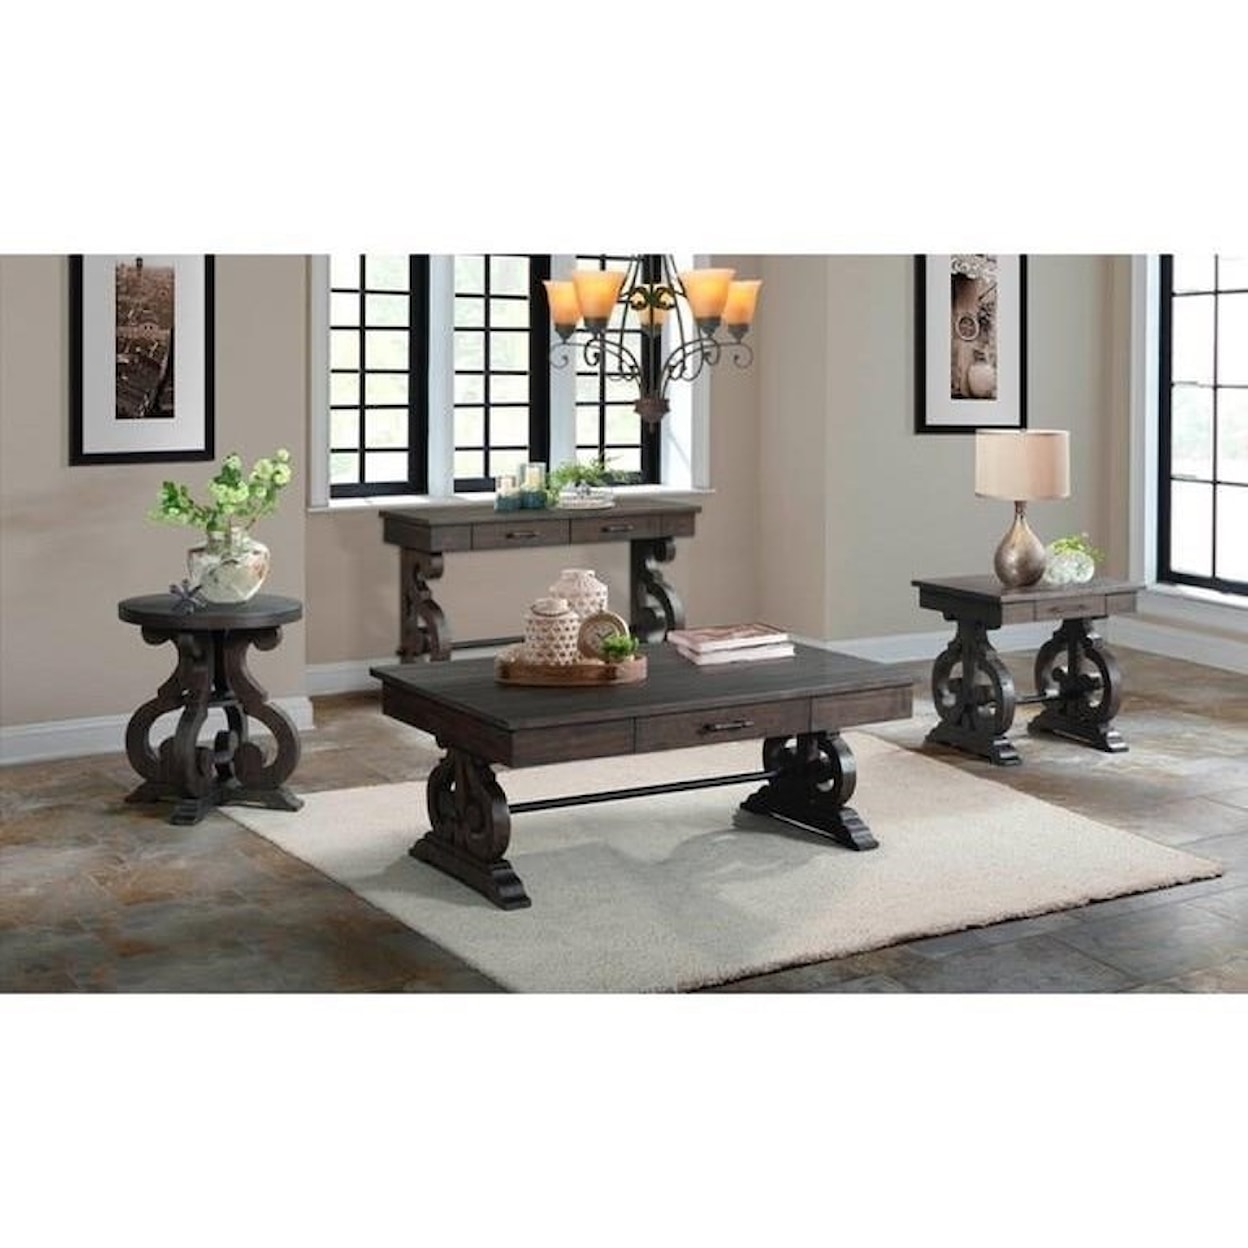 Elements International Stone Round End Table